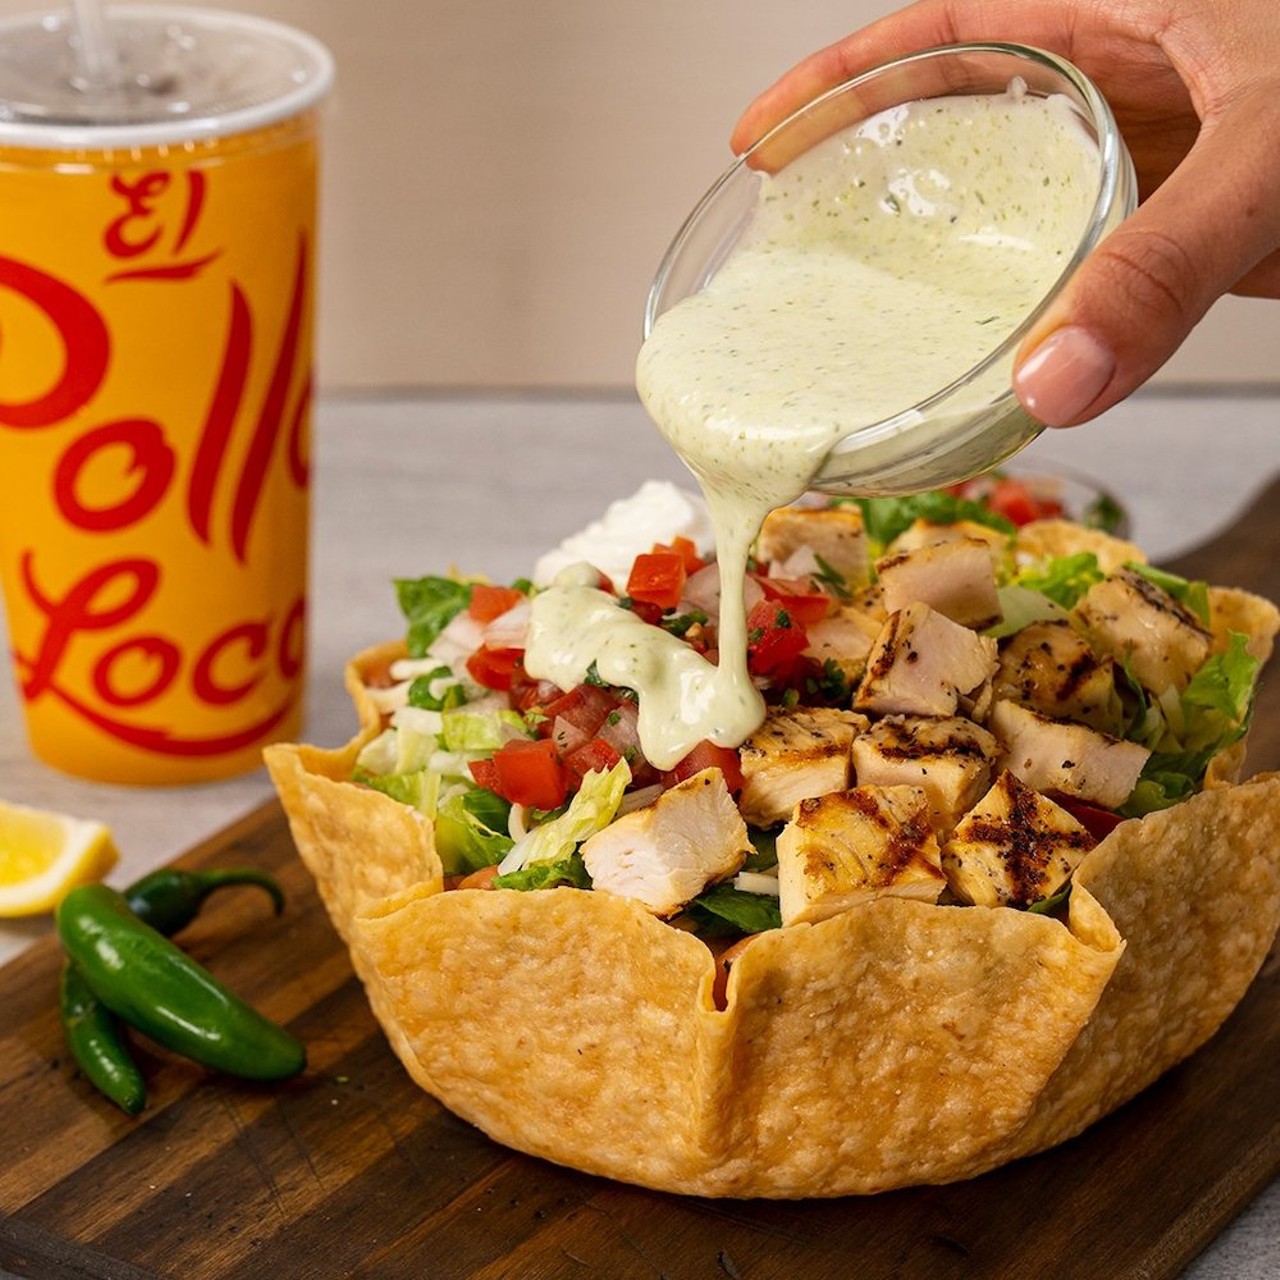 El Pollo Loco
El Pollo Loco offers Mexican-style meals like burritos, tacos, bowls and tostada salads centered around their famous fire-grilled chicken and handmade guacamoles and salsas. They also offer entrees featuring pieces of their bone-in chicken served with rice, beans and tortillas. On the side, you can get the Loco Side Salad or more traditional southern styles like broccoli, macaroni & cheese, mashed potatoes and gravy or coleslaw.